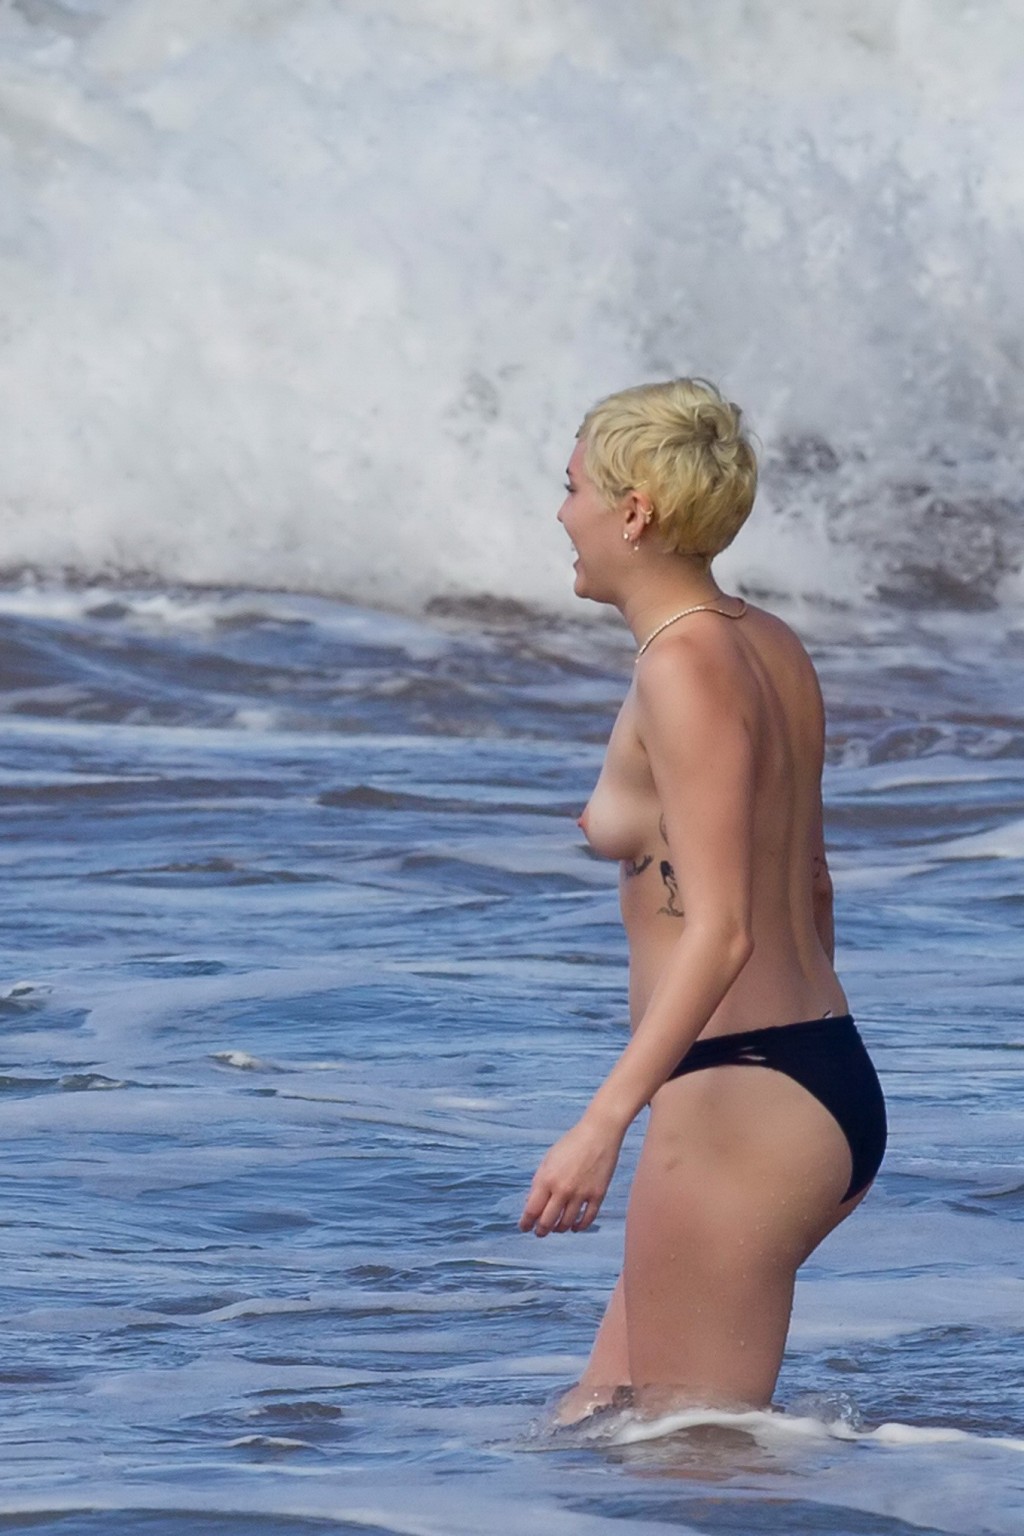 Miley Cyrus caught topless at the beach during the vacation in Hawaii #75174485